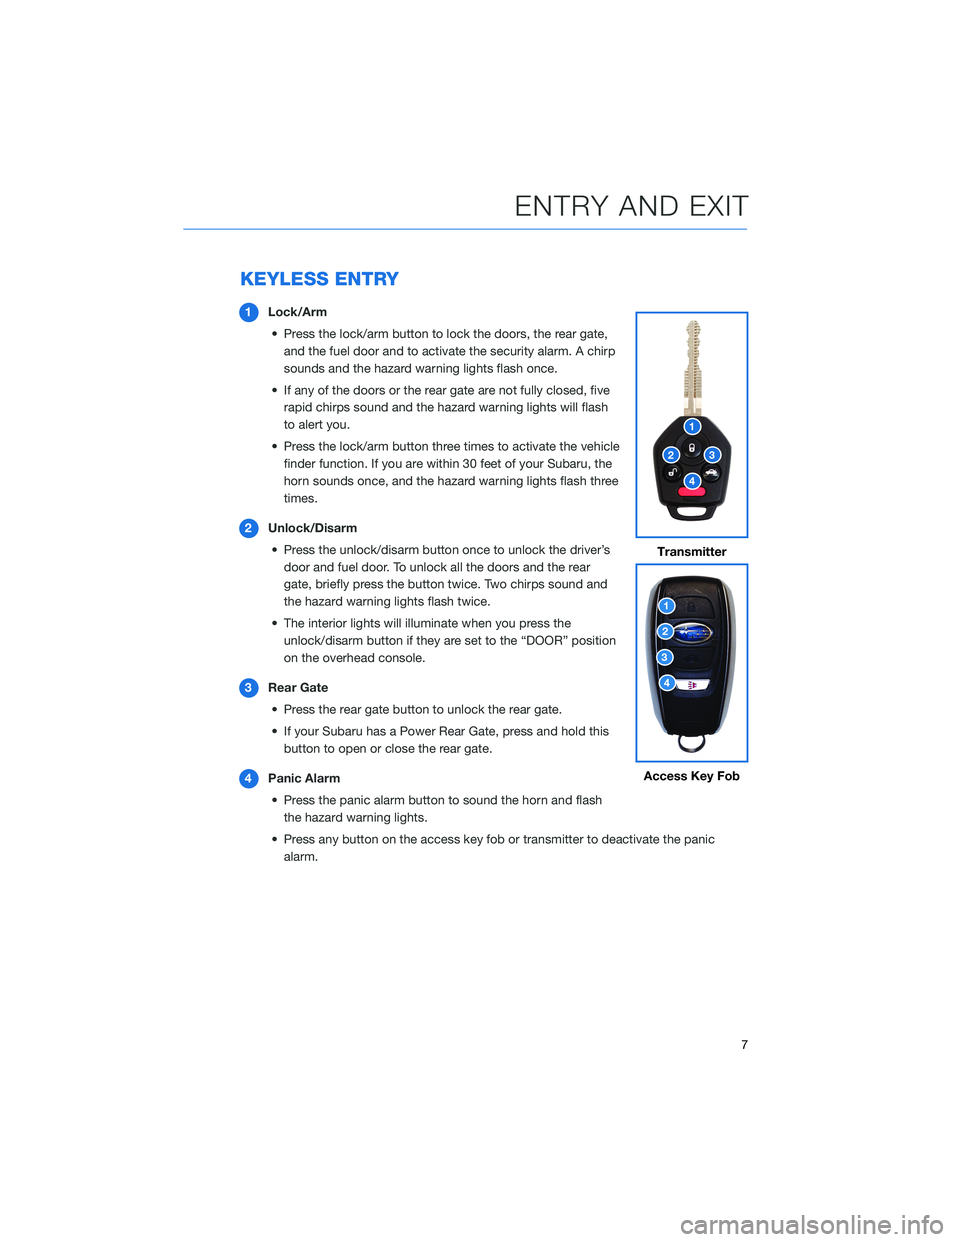 SUBARU FORESTER 2021  Getting Started Guide KEYLESS ENTRY
1Lock/Arm
• Press the lock/arm button to lock the doors, the rear gate,
and the fuel door and to activate the security alarm. A chirp
sounds and the hazard warning lights flash once.
�